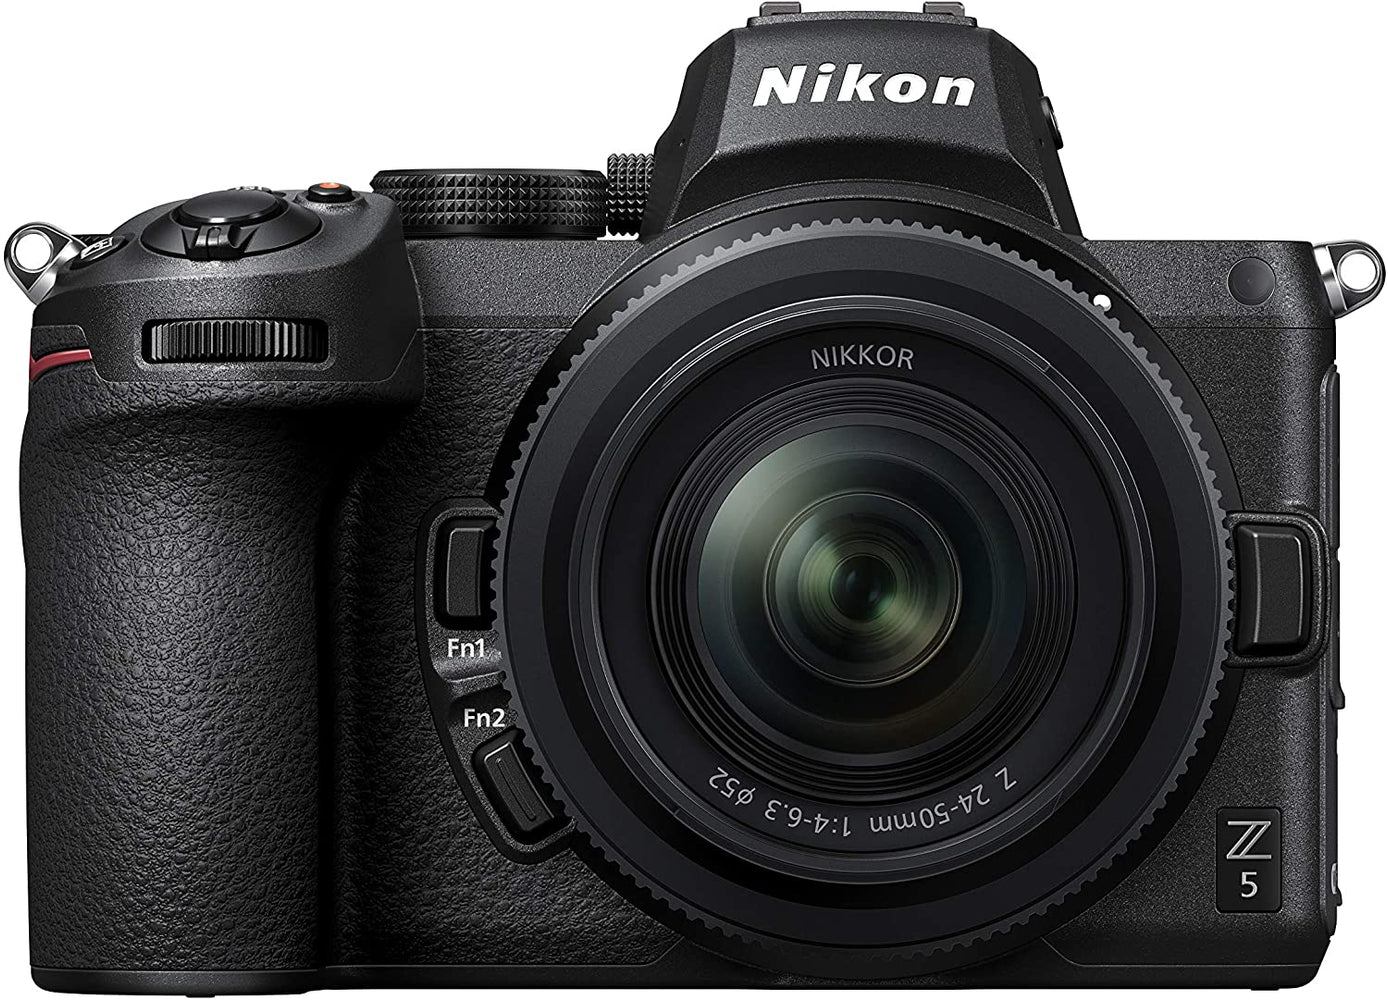 Nikon VOA040K003 Z5 + Z 24-50mm + FTZ Kit Mirrorless Camera (273-point Hybrid AF, 5-axis in-Body Optical Image stabilisation, 4K Movies, Duel Card Slots)